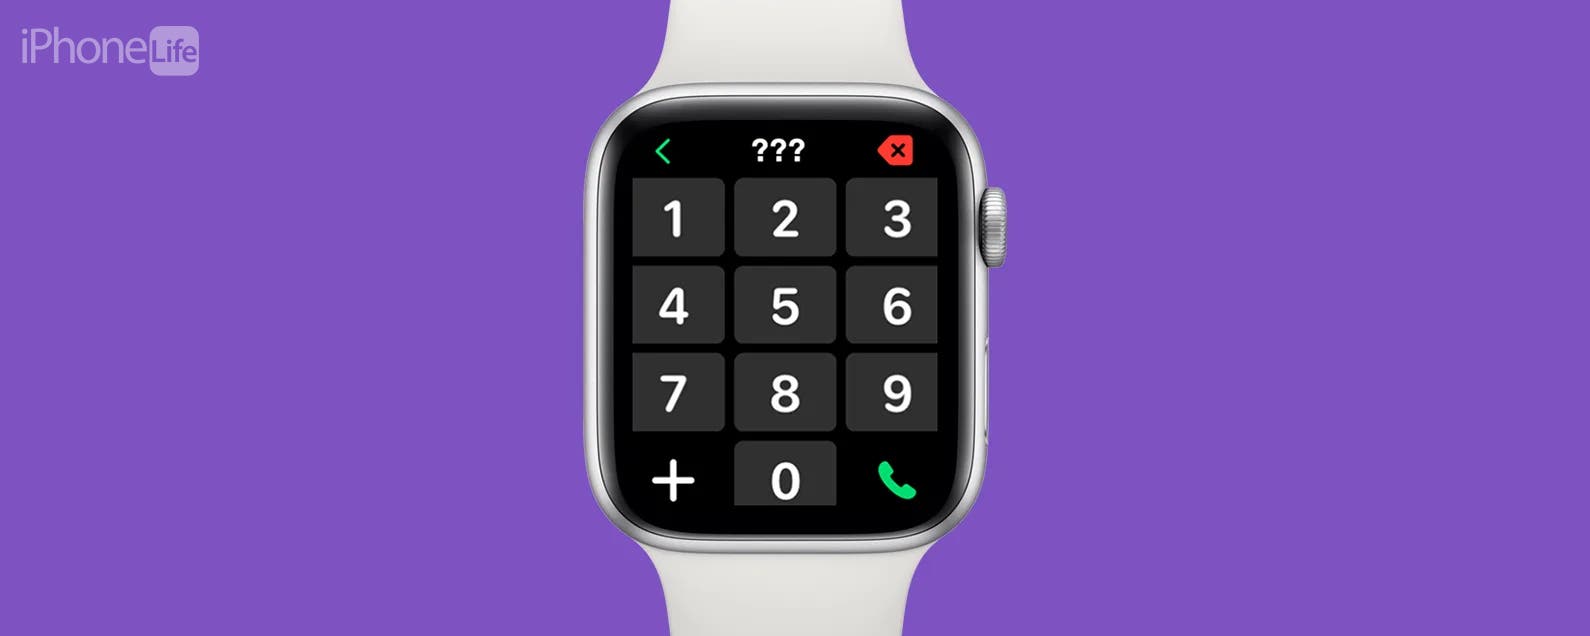 How to See Full Number on Apple Watch Messages - YouTube